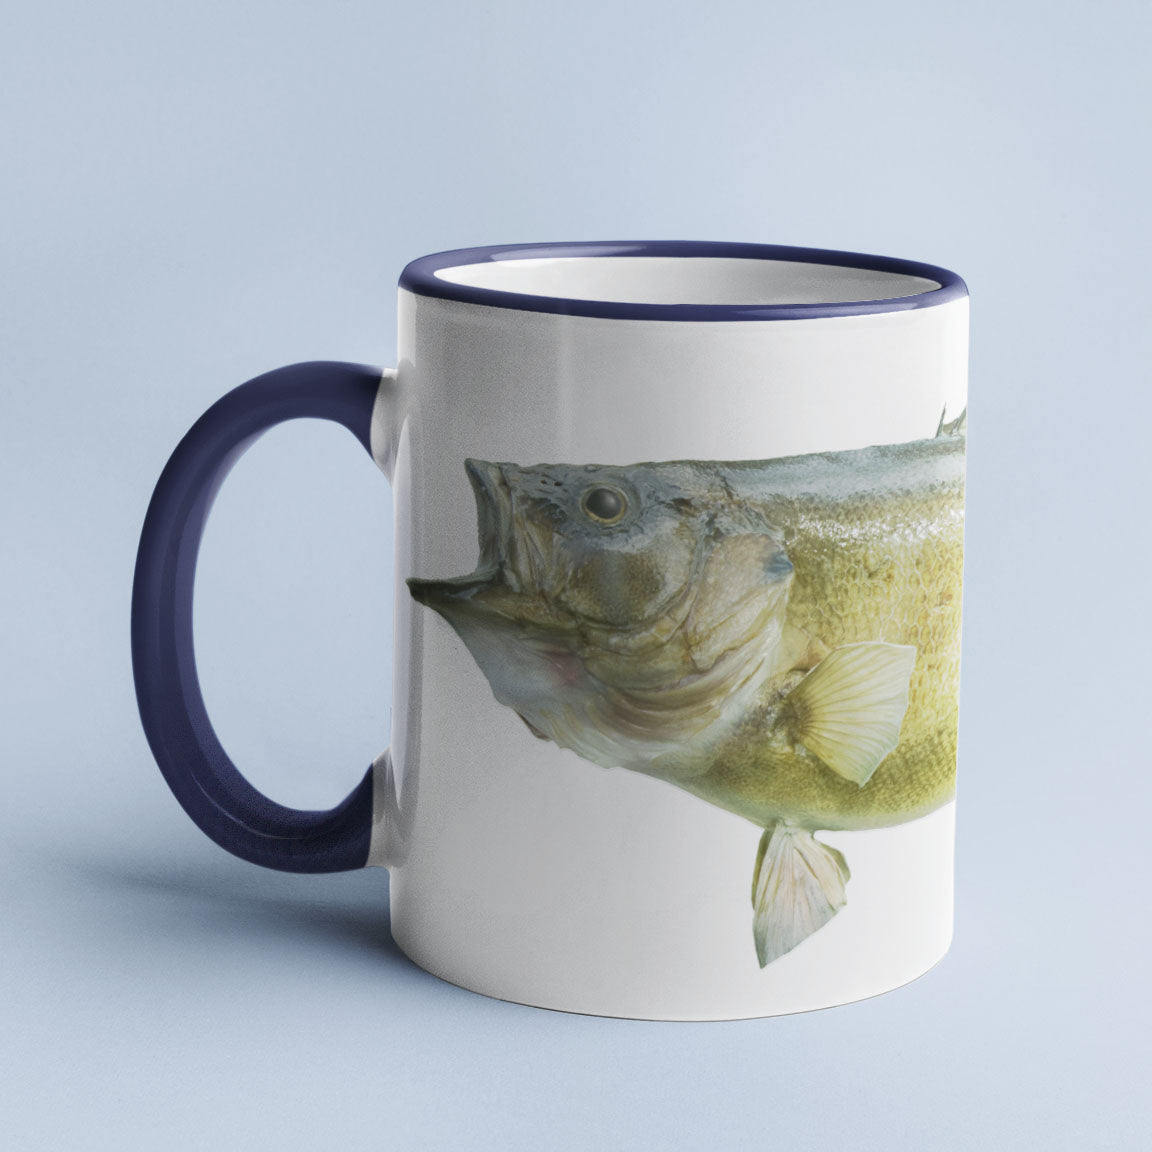 Smallmouth Bass accent mug with dark blue handle on light blue background.